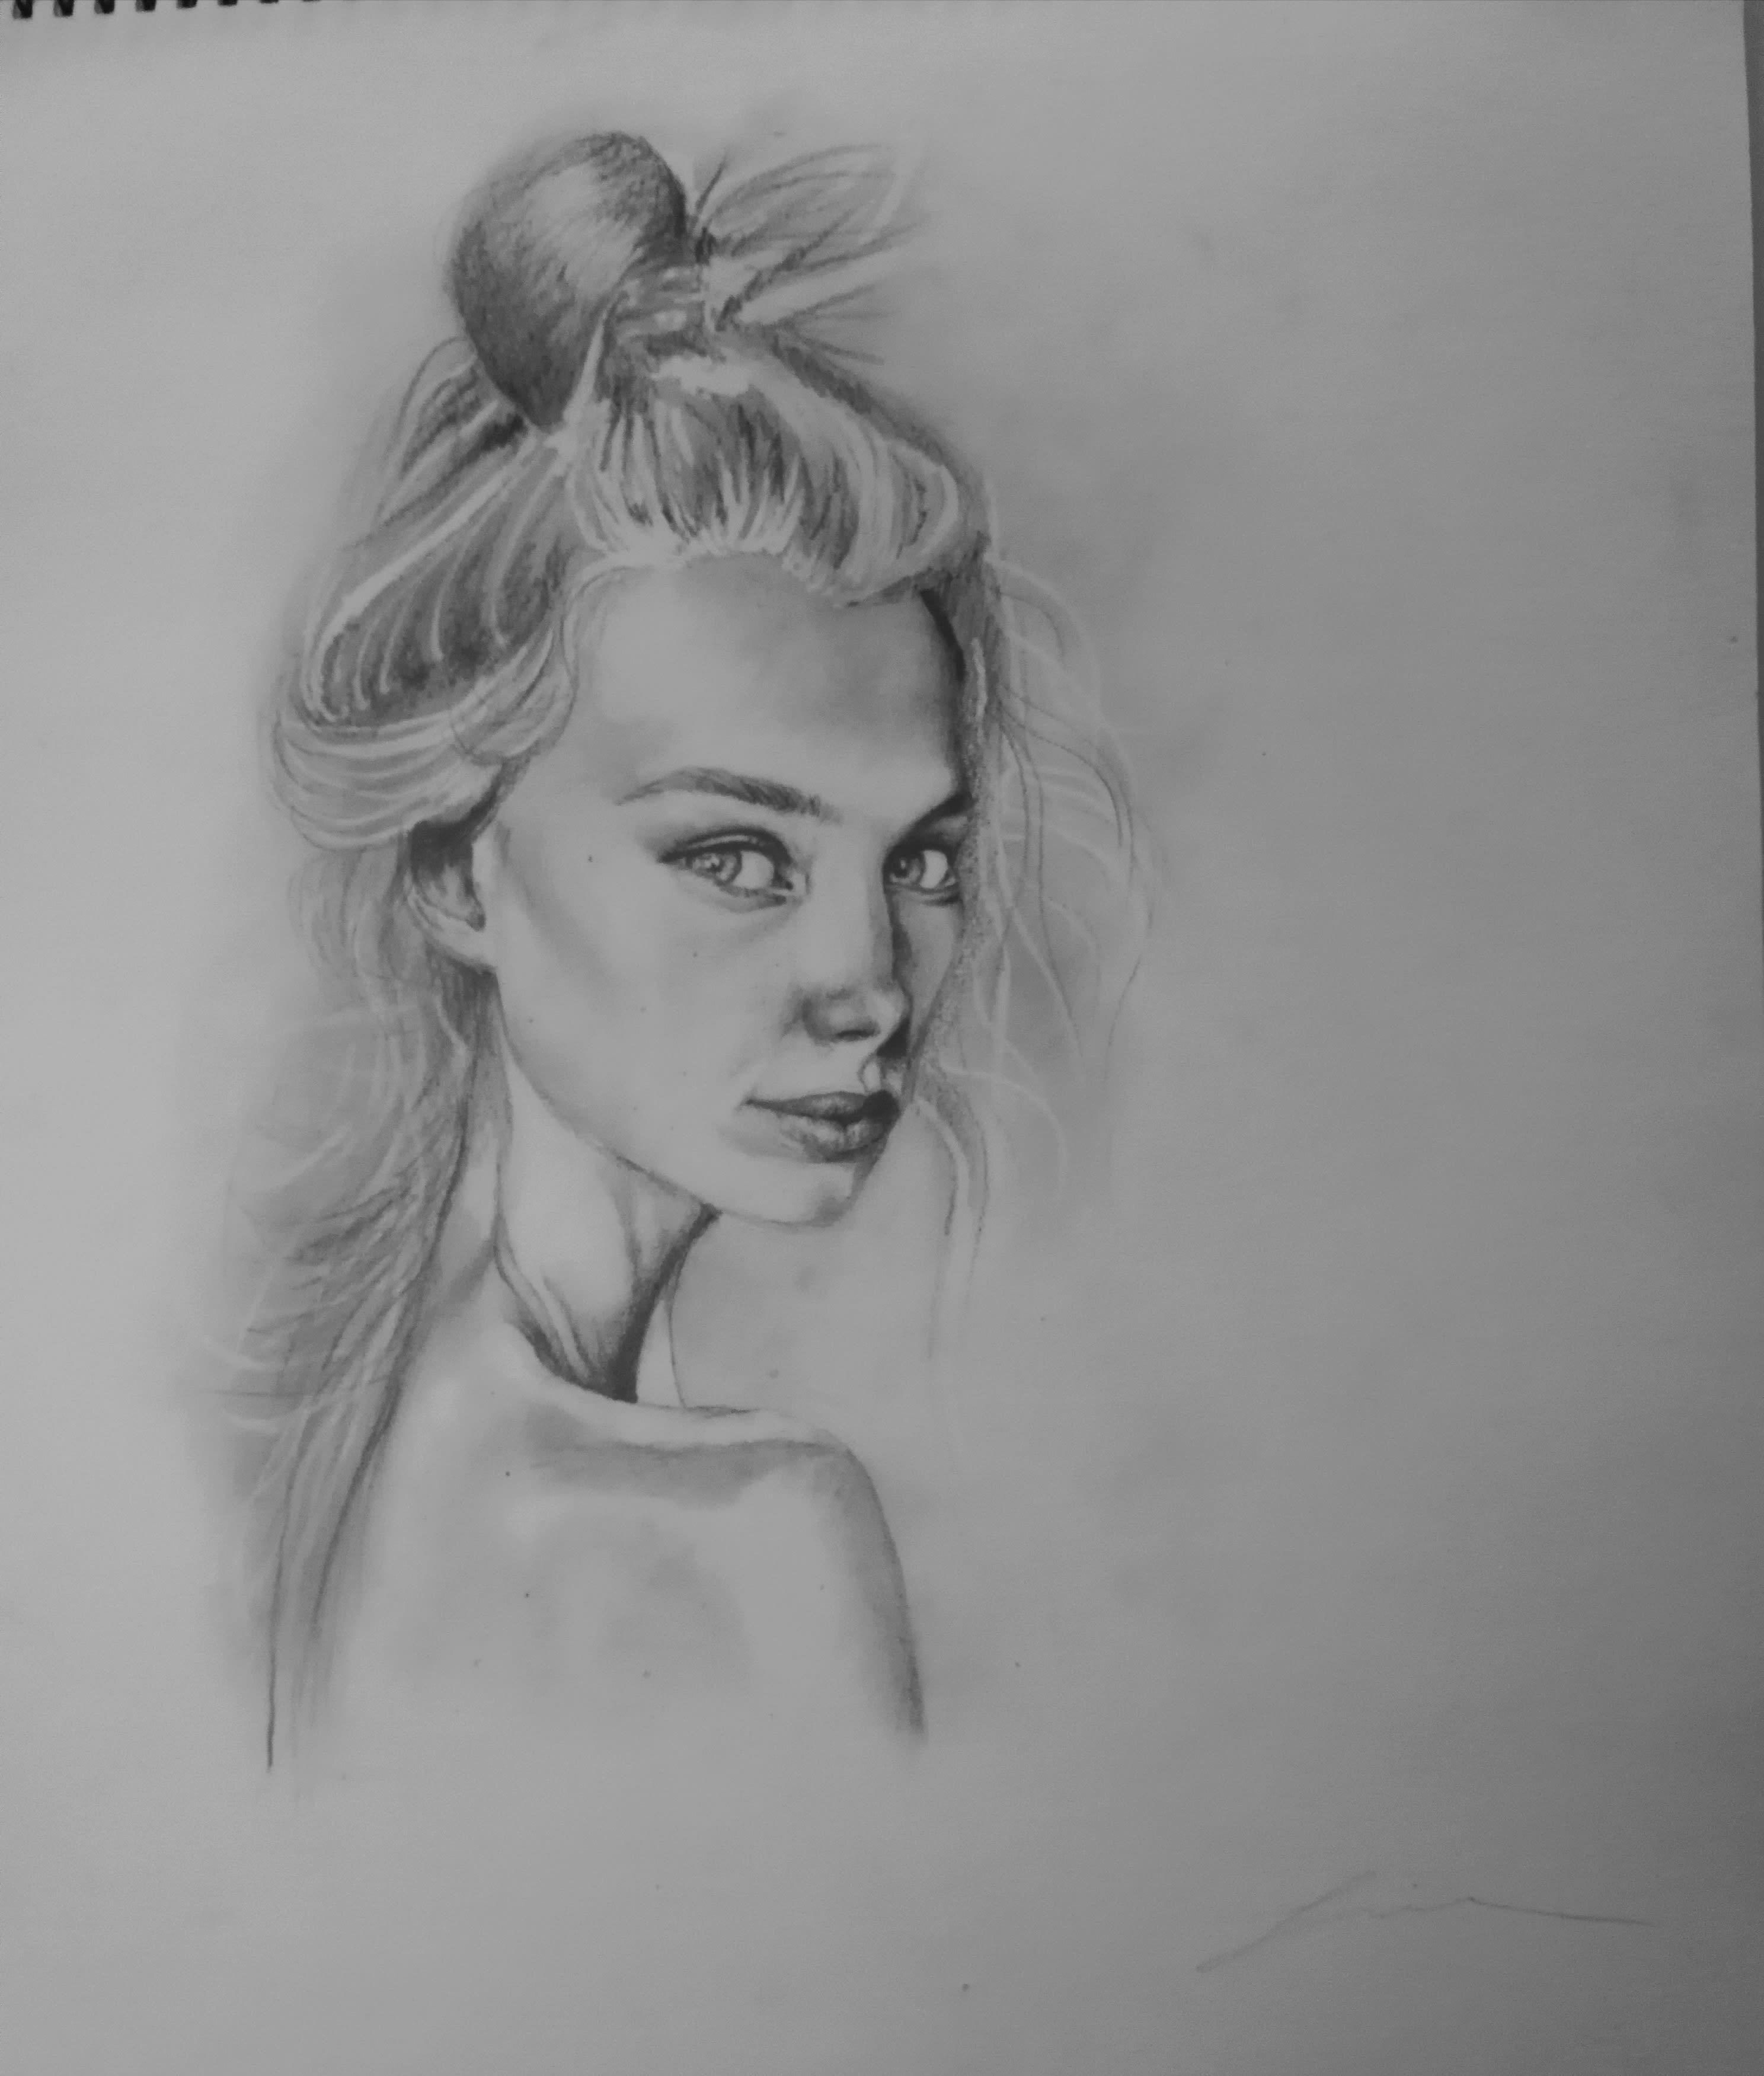 20 Realistic Portrait Drawings and Sketches - Beautiful Dawn Designs